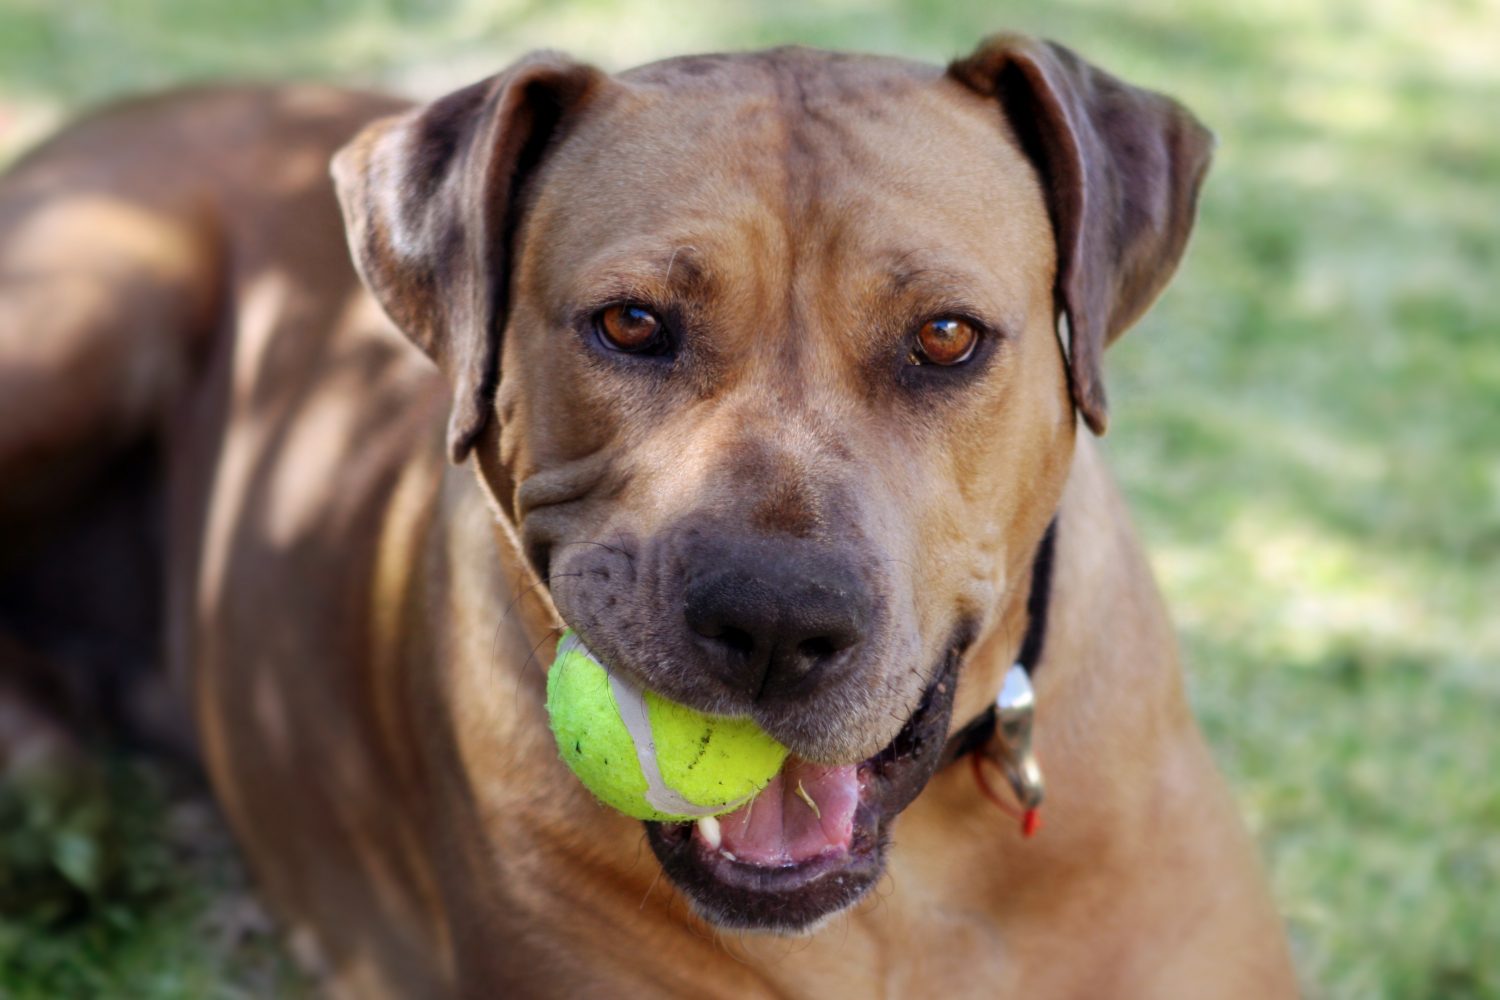 Rhodesian ridgeback with a tennis ball in her mouth, ready to play.